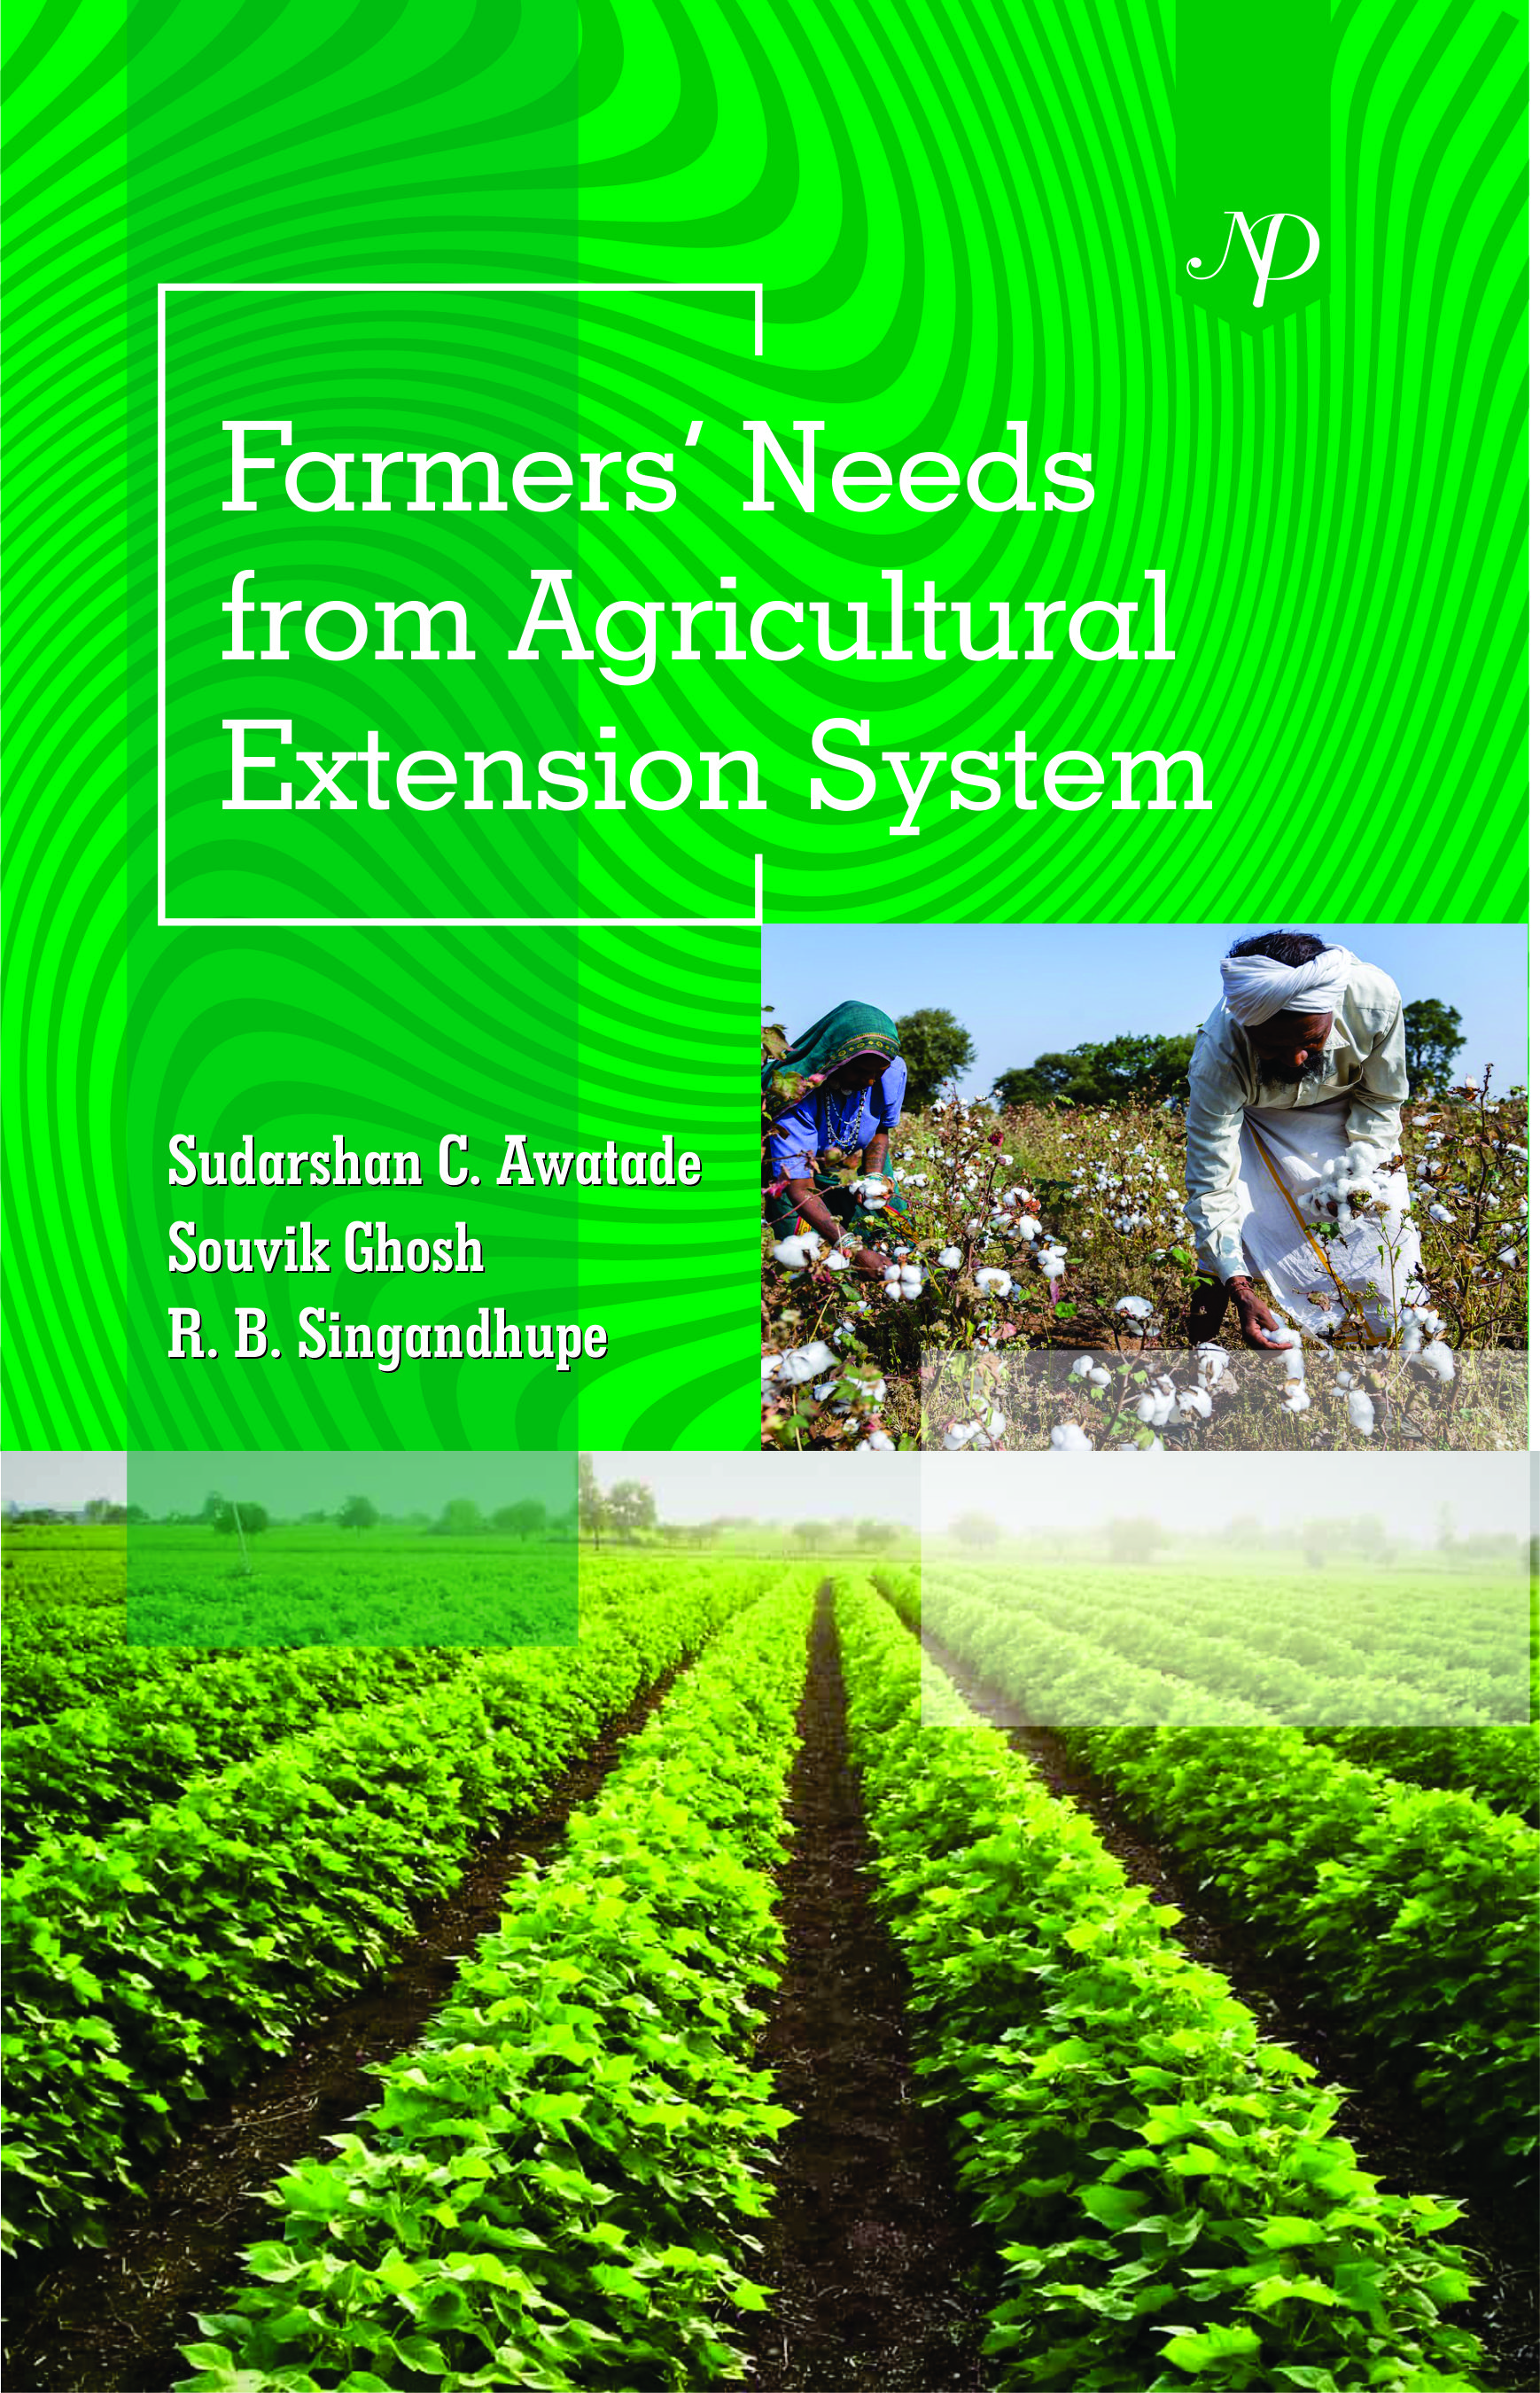 Farmers’ Needs from Agricultural Extension System Cover.jpg